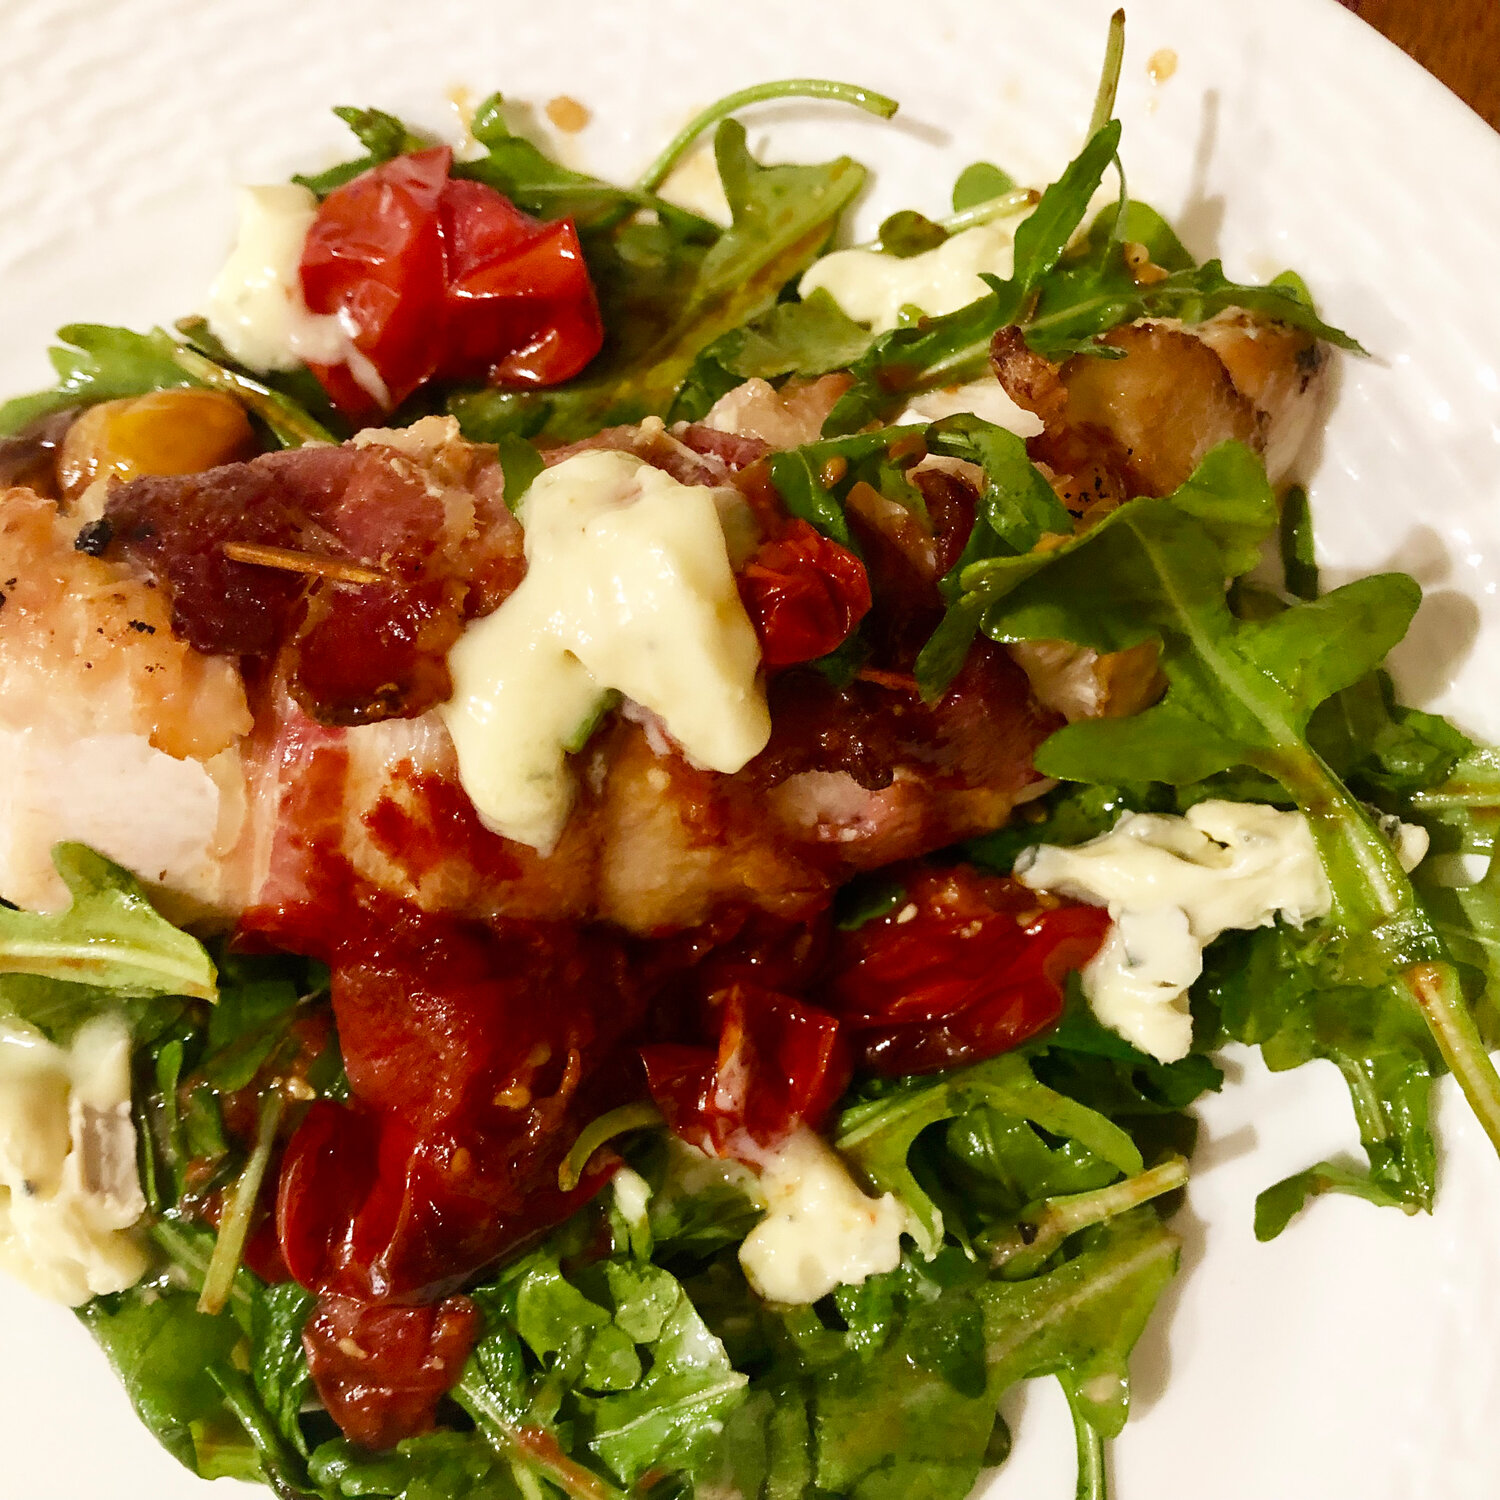 Bacon wrapped chicken with blue cheese and blistered cherry tomatoes.